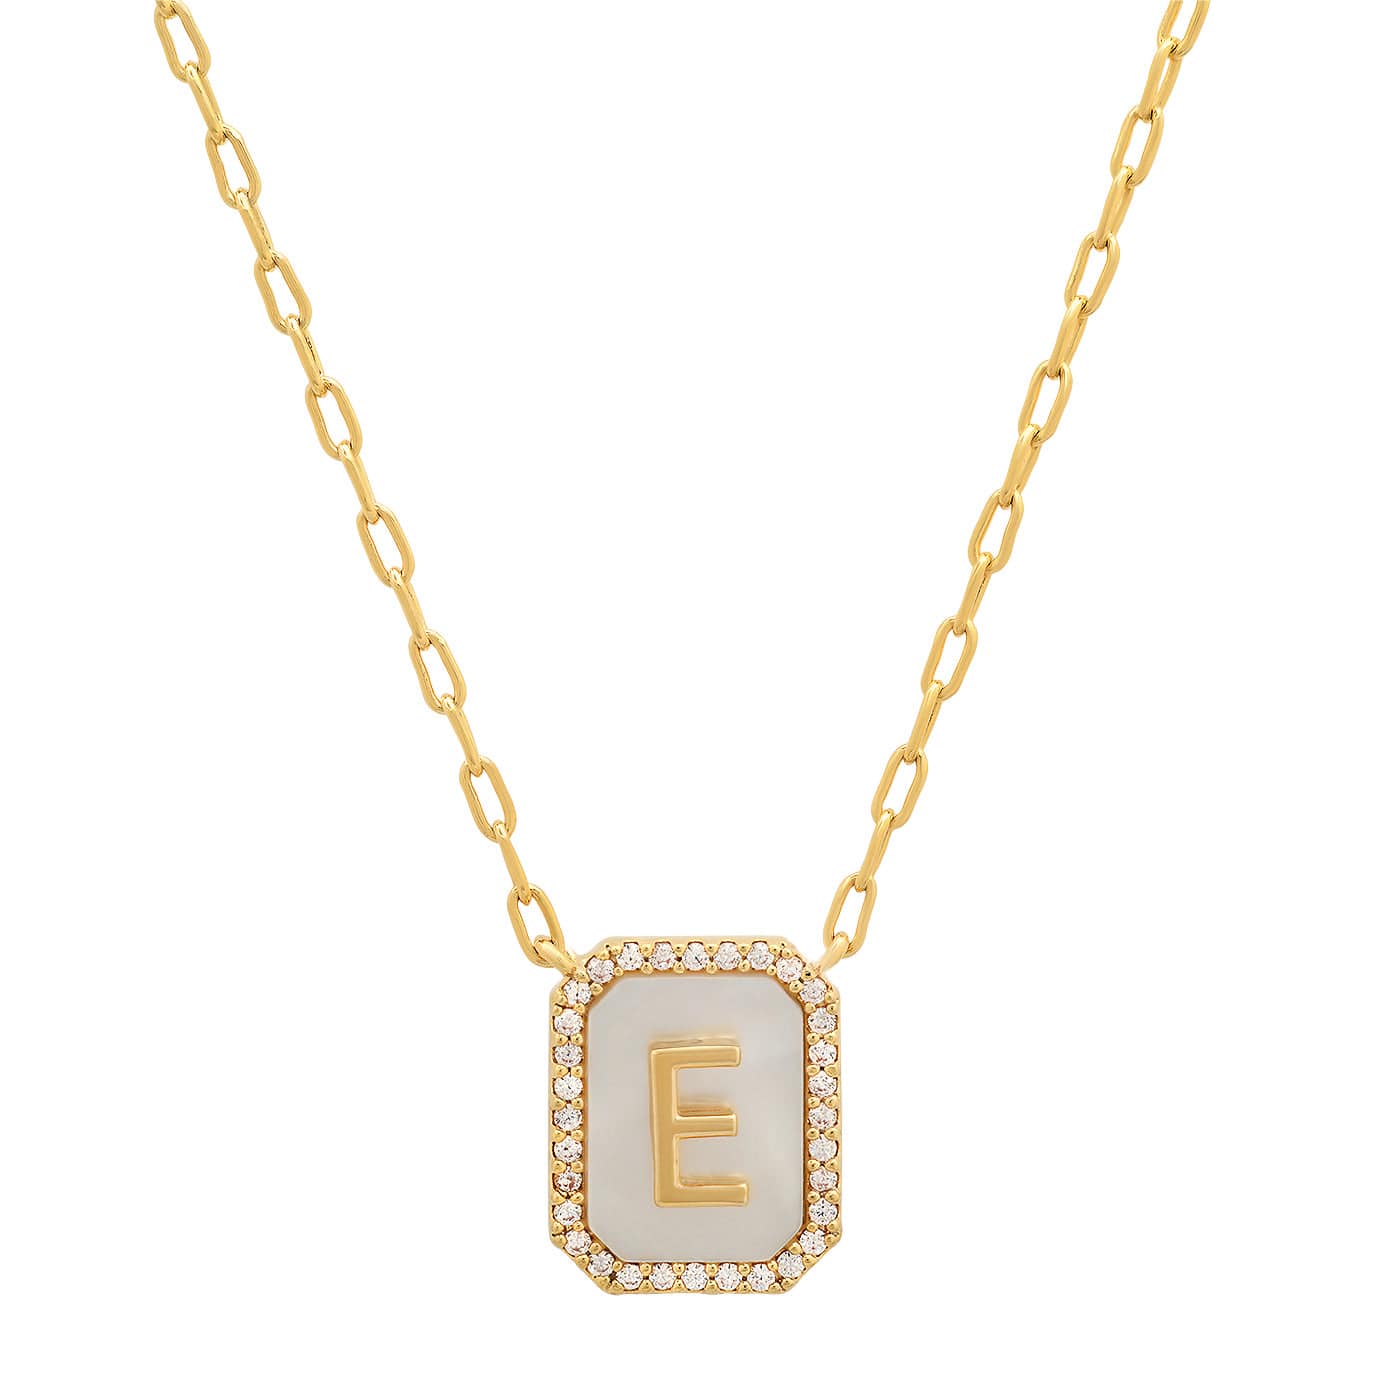 TAI JEWELRY Necklace E Mother Of Pearl Monogram Necklace